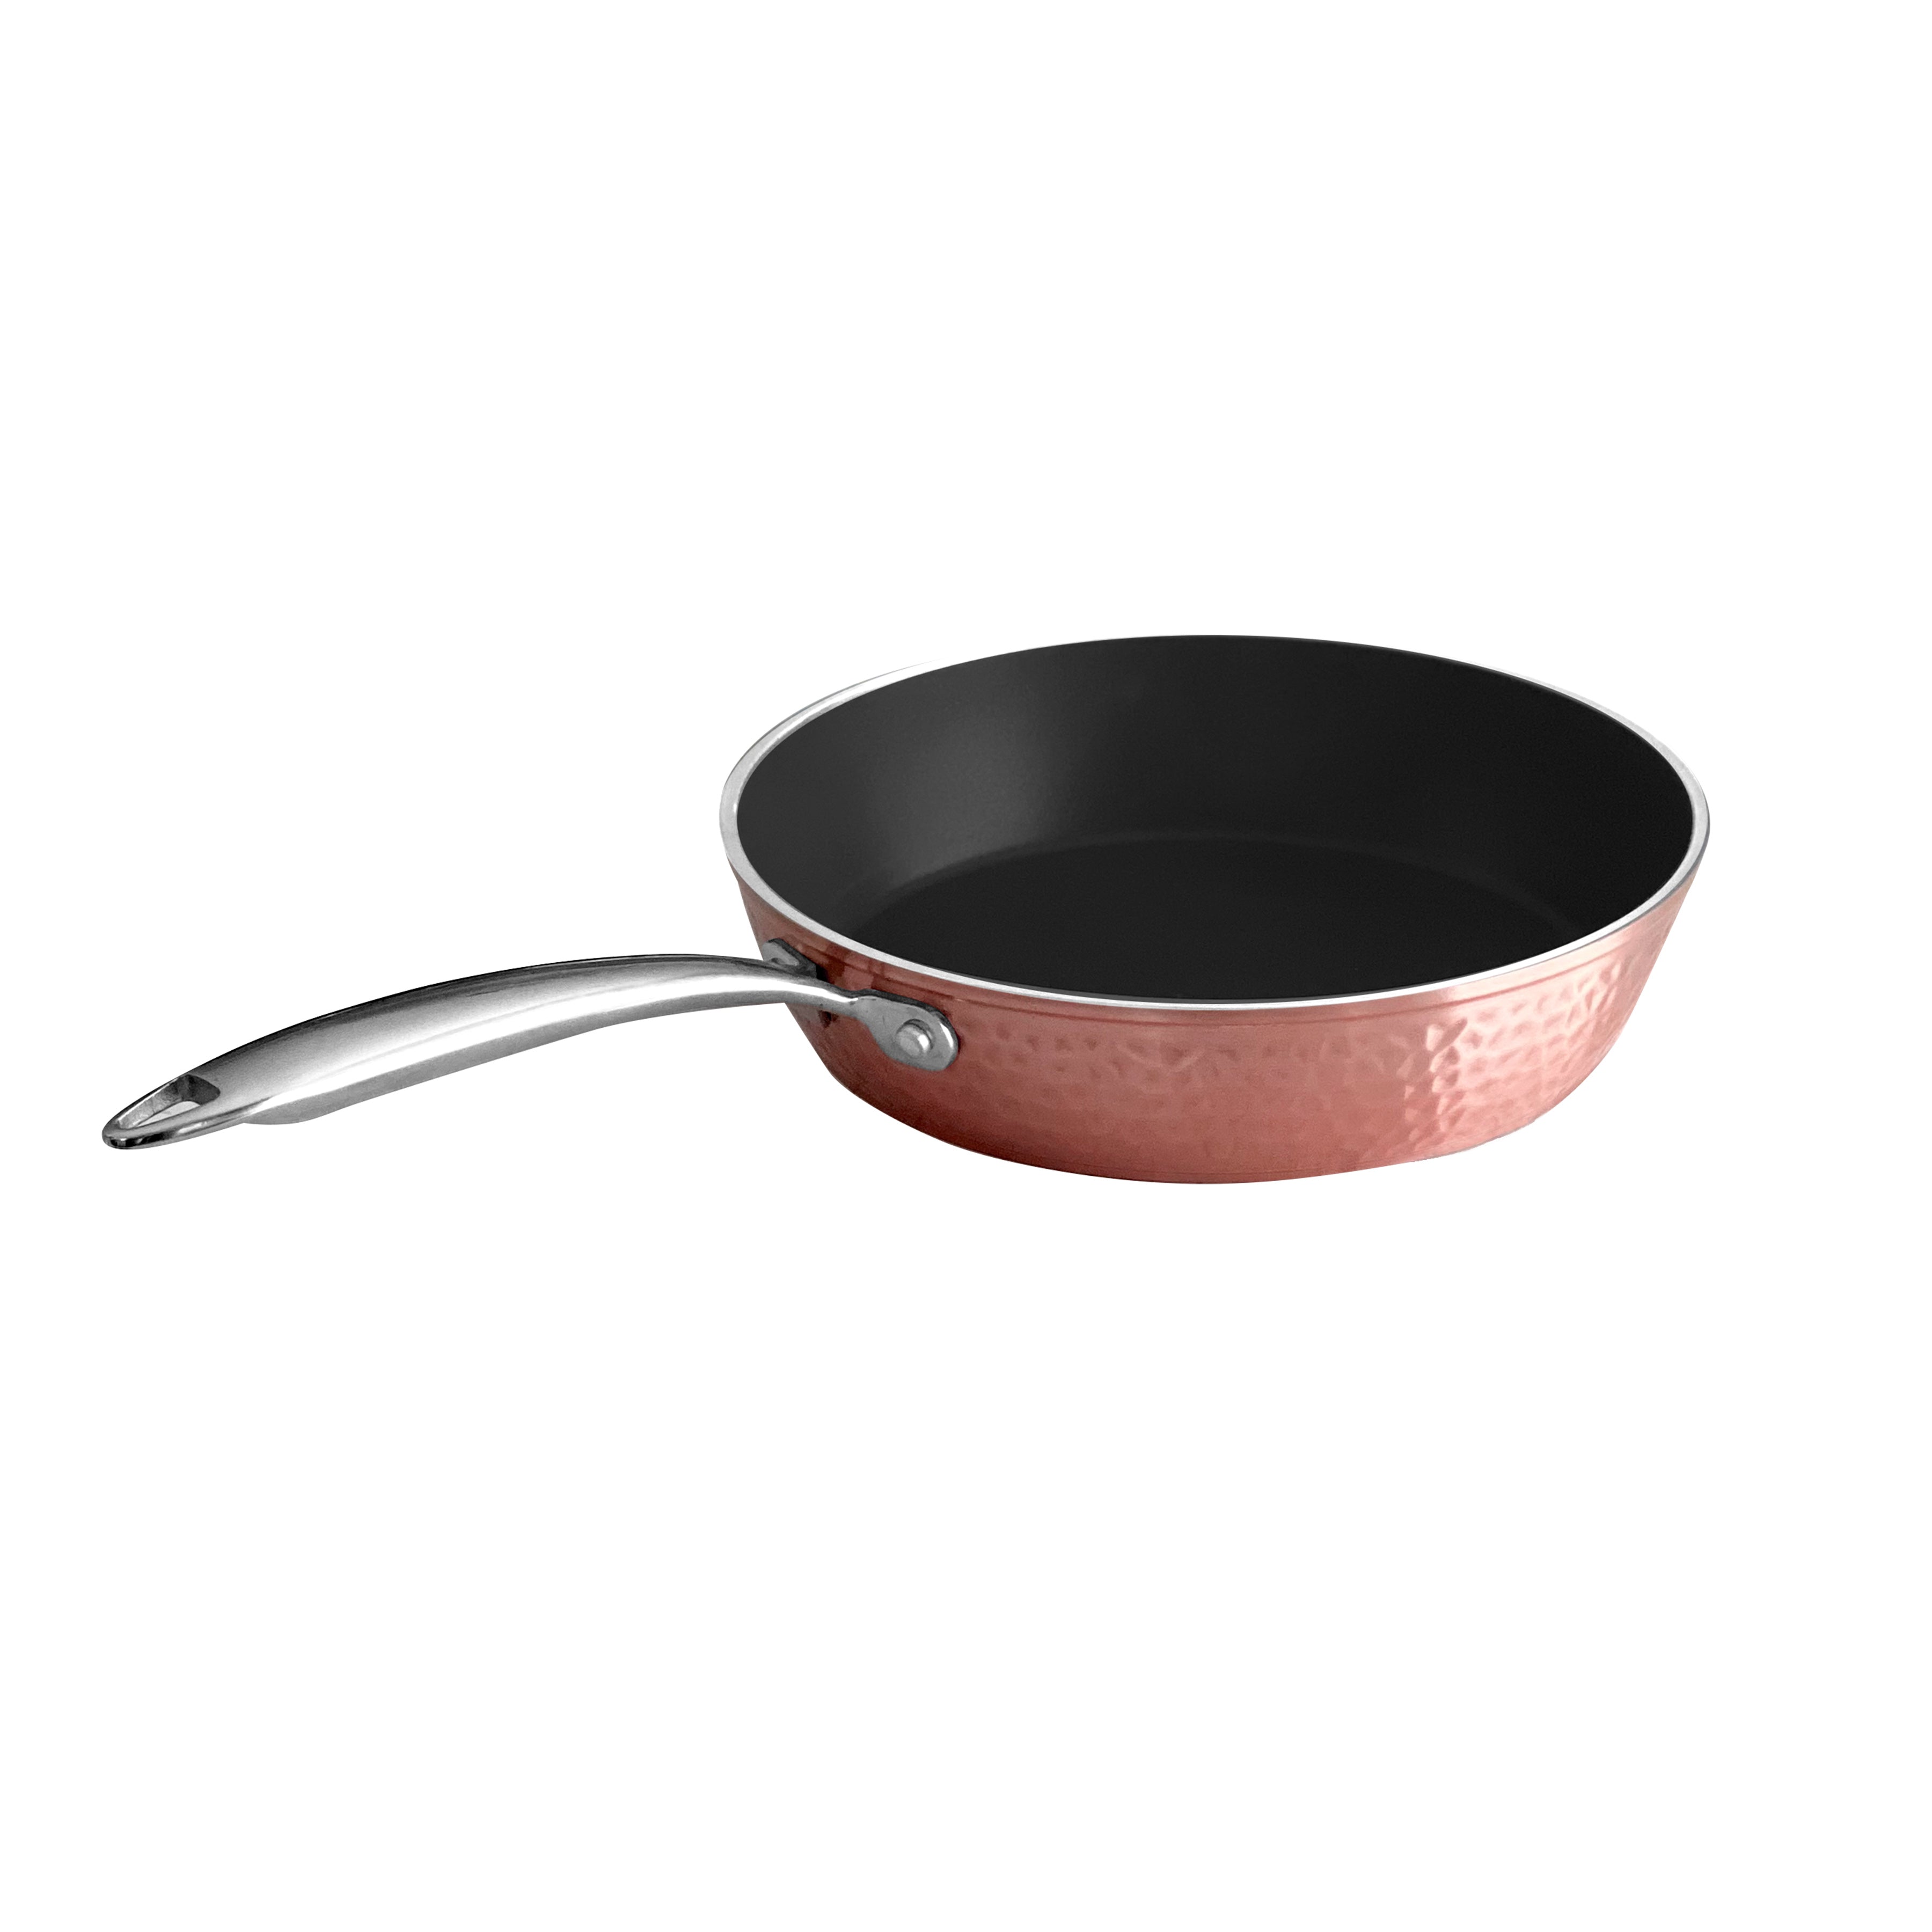 Orgreenic 8 inch Ceramic Pan for Cooking - Non Stick Pan with Lid, Rose  Hammered Cookware, Elegantly Designed, Lightweight & Durable for All Stove  Top